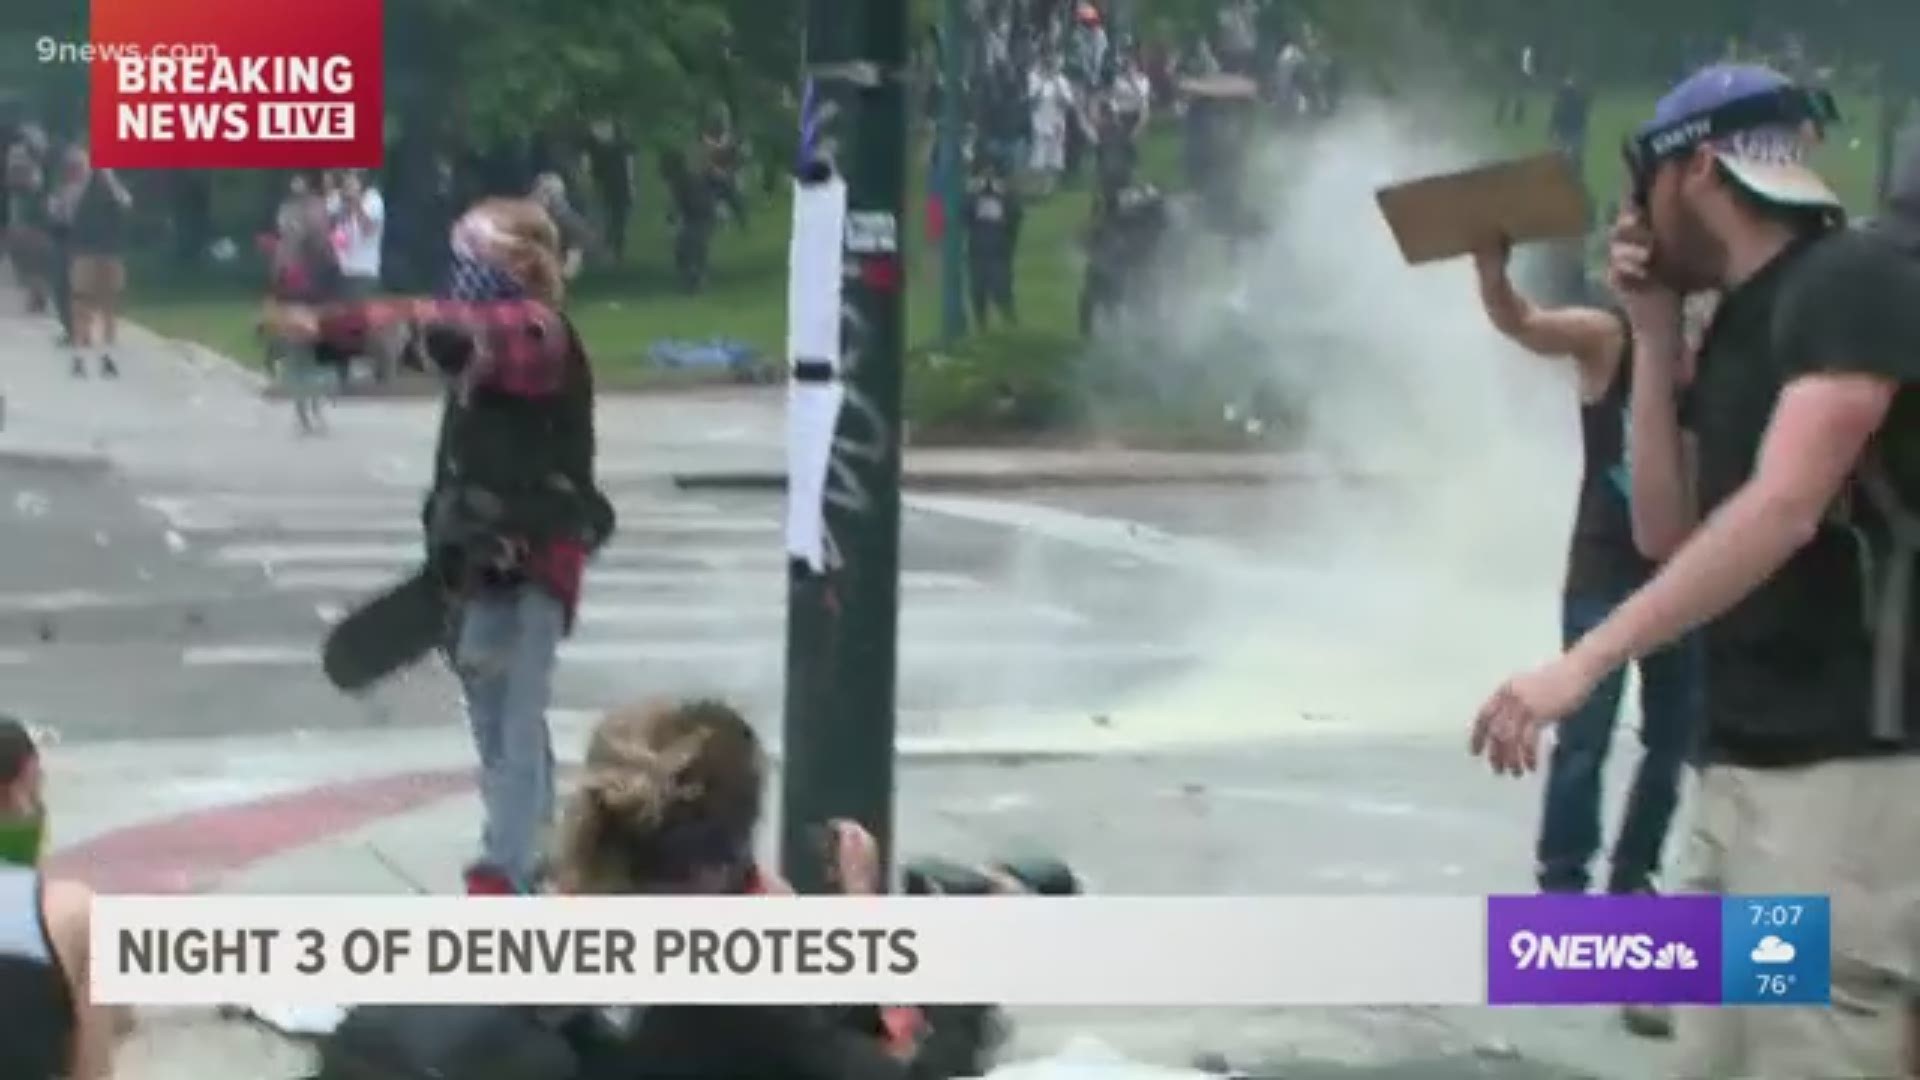 Jeremey Jojola reports from downtown Denver where protestors are clashing with police for a third straight night.